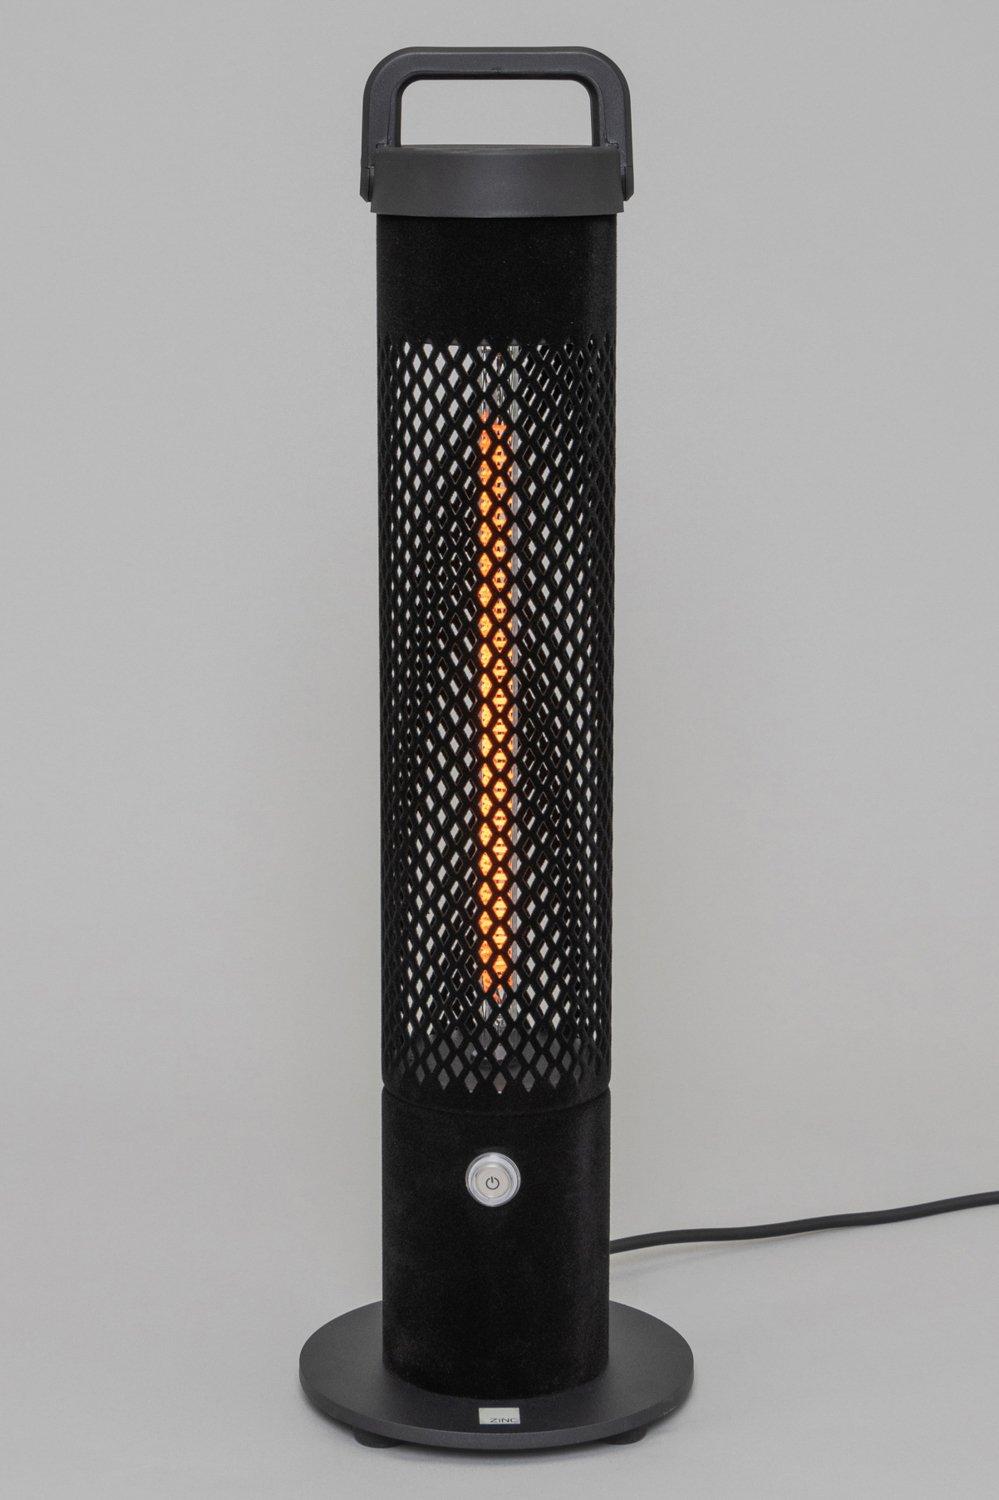 1200W Free Standing Radiant Heater